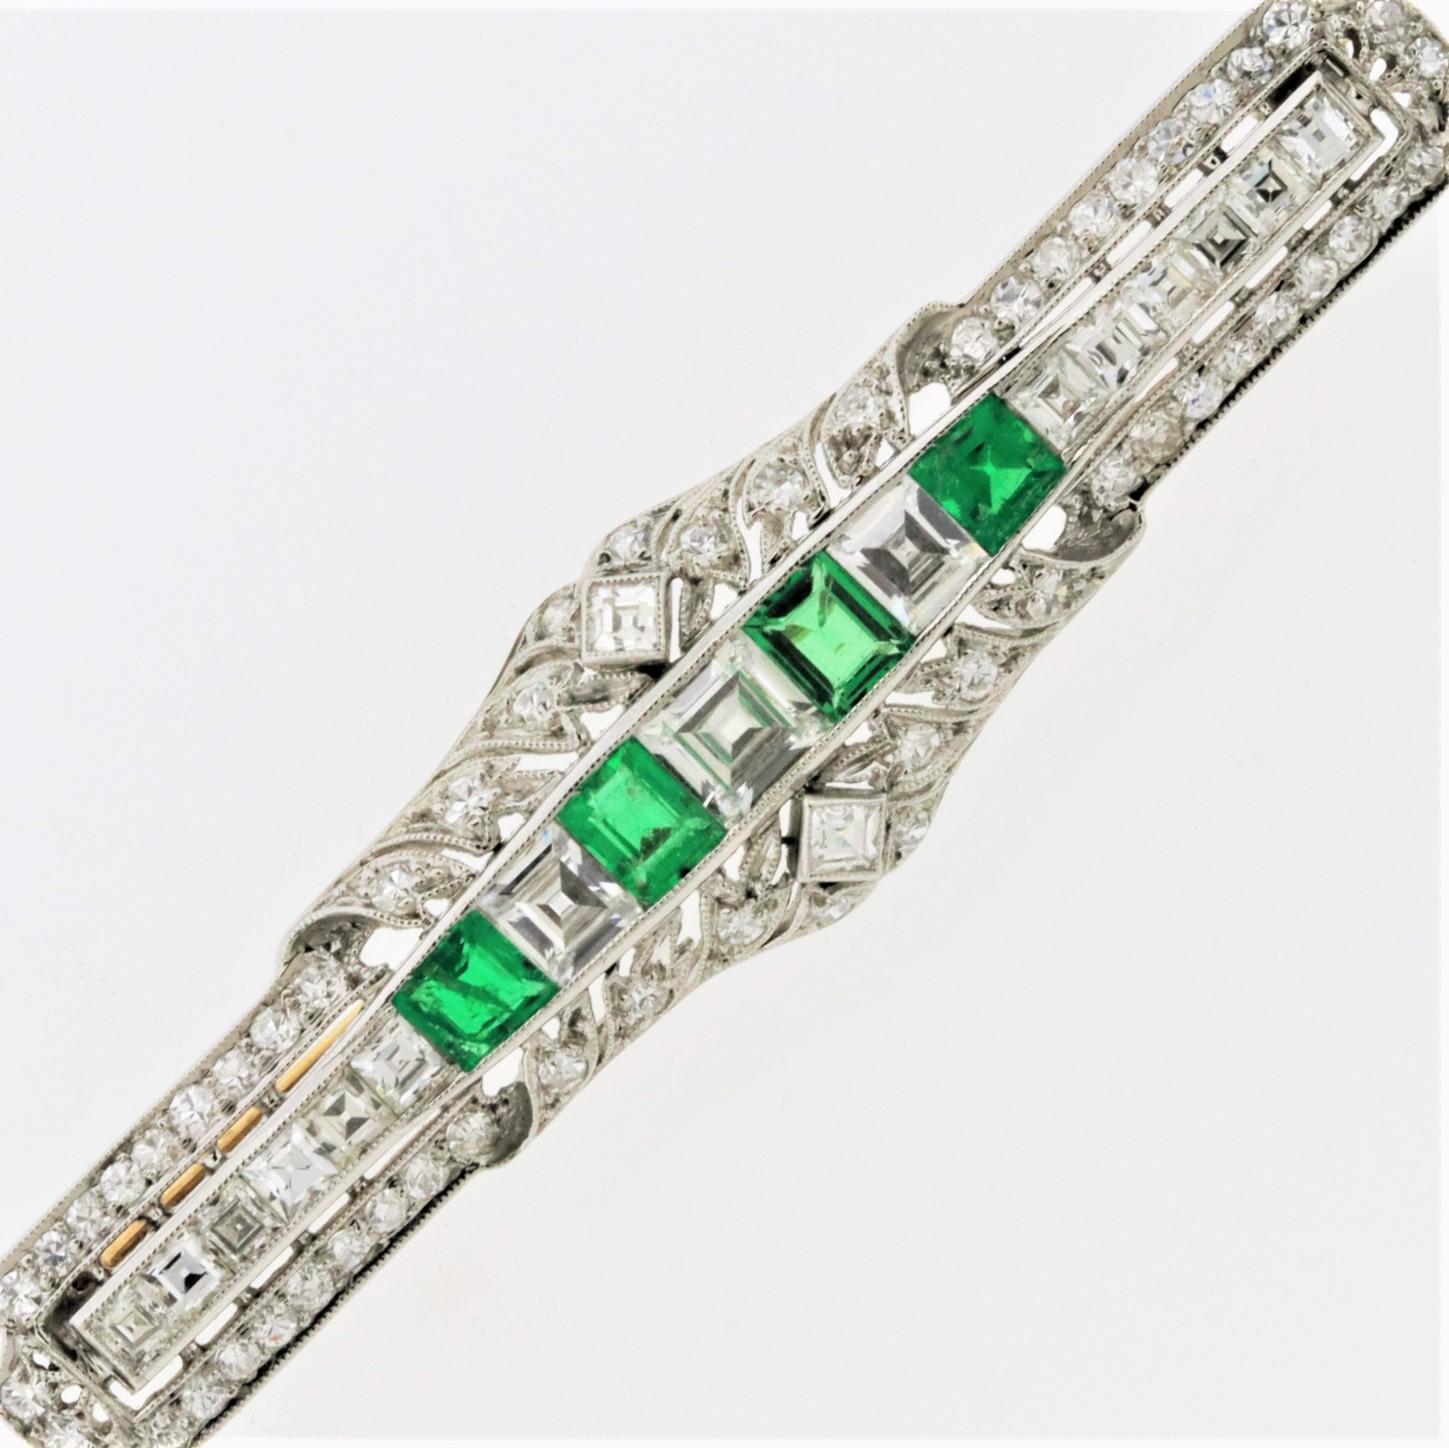 A top-quality brooch with fine gem emerald and diamonds made in the early Art Deco movement, circa 1925. It is an early Art Deco piece as it has some elements of Edwardian era garland motifs on the outer top and bottom of the piece while the center